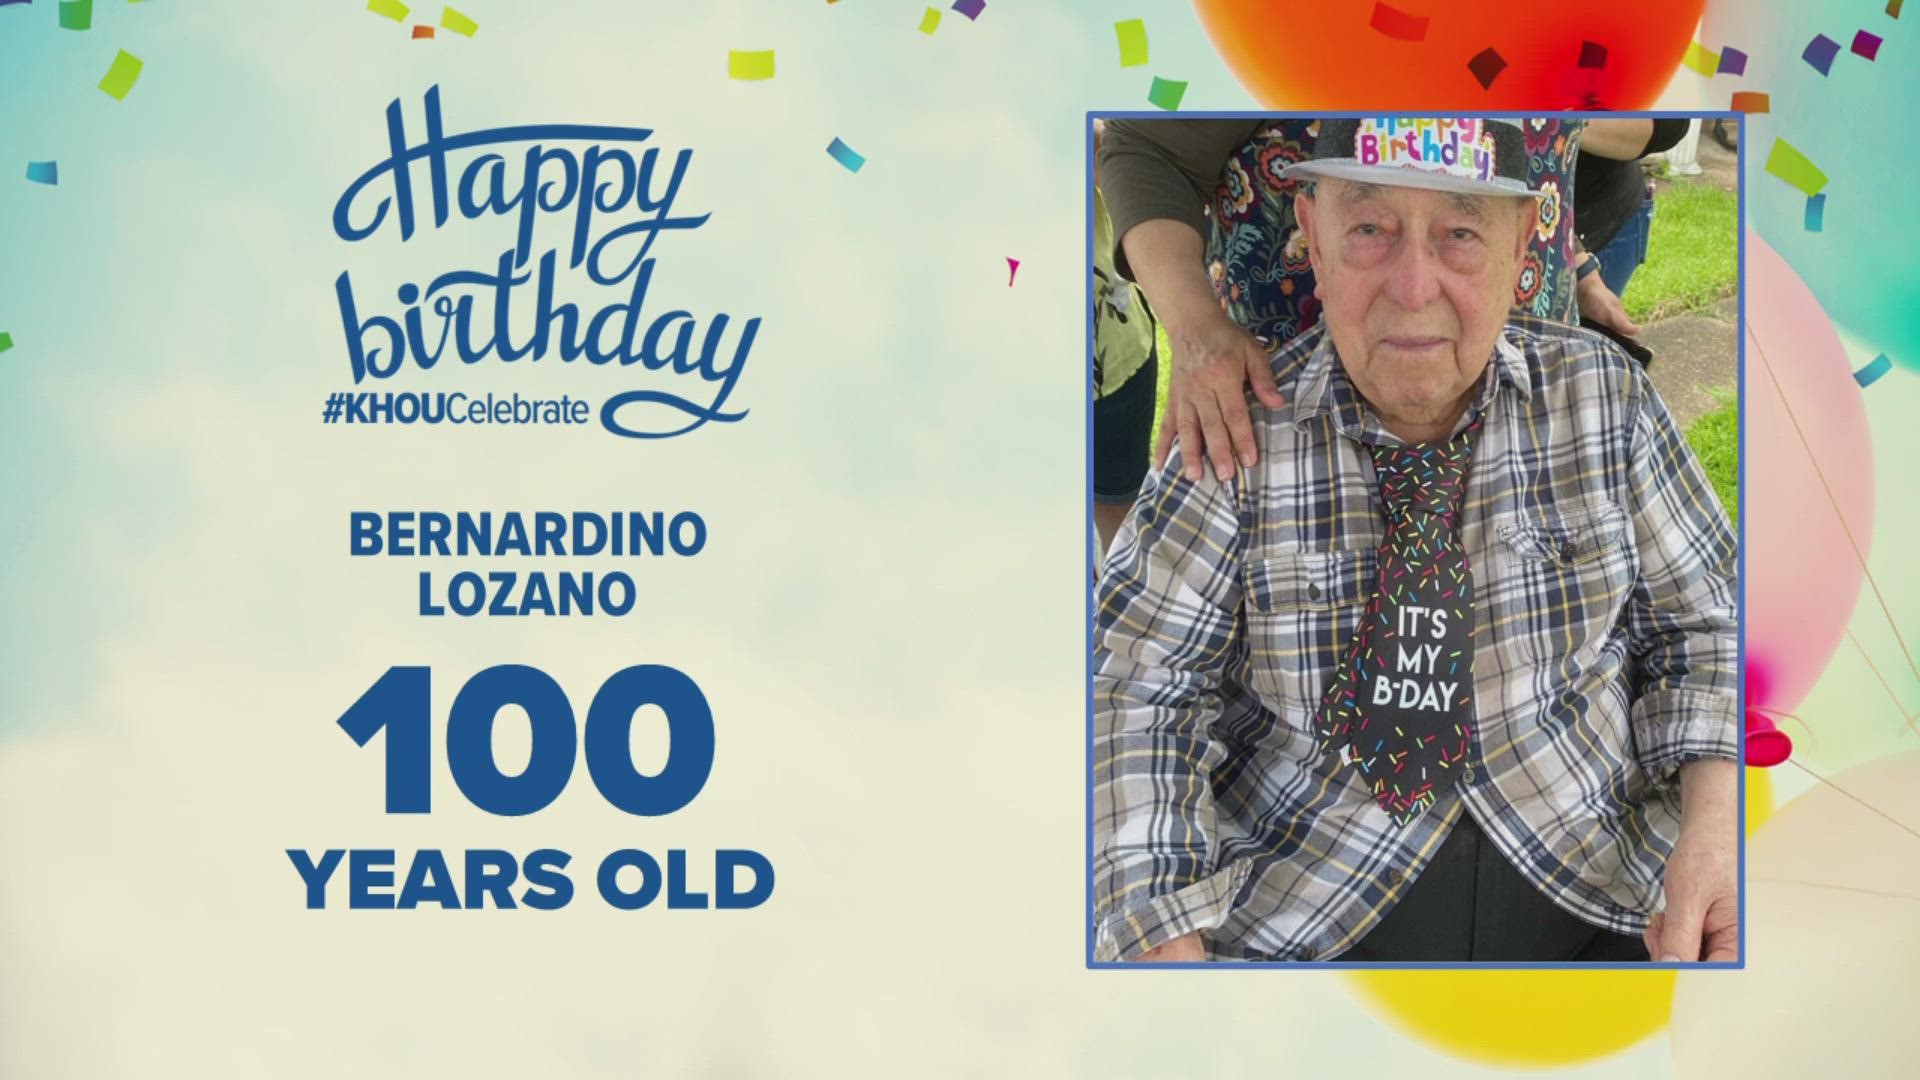 Happy 100th birthday to Bernardino Lozano! We're also celebrating 6-year-old twins and a 9-year-old who is pretty as a princess.